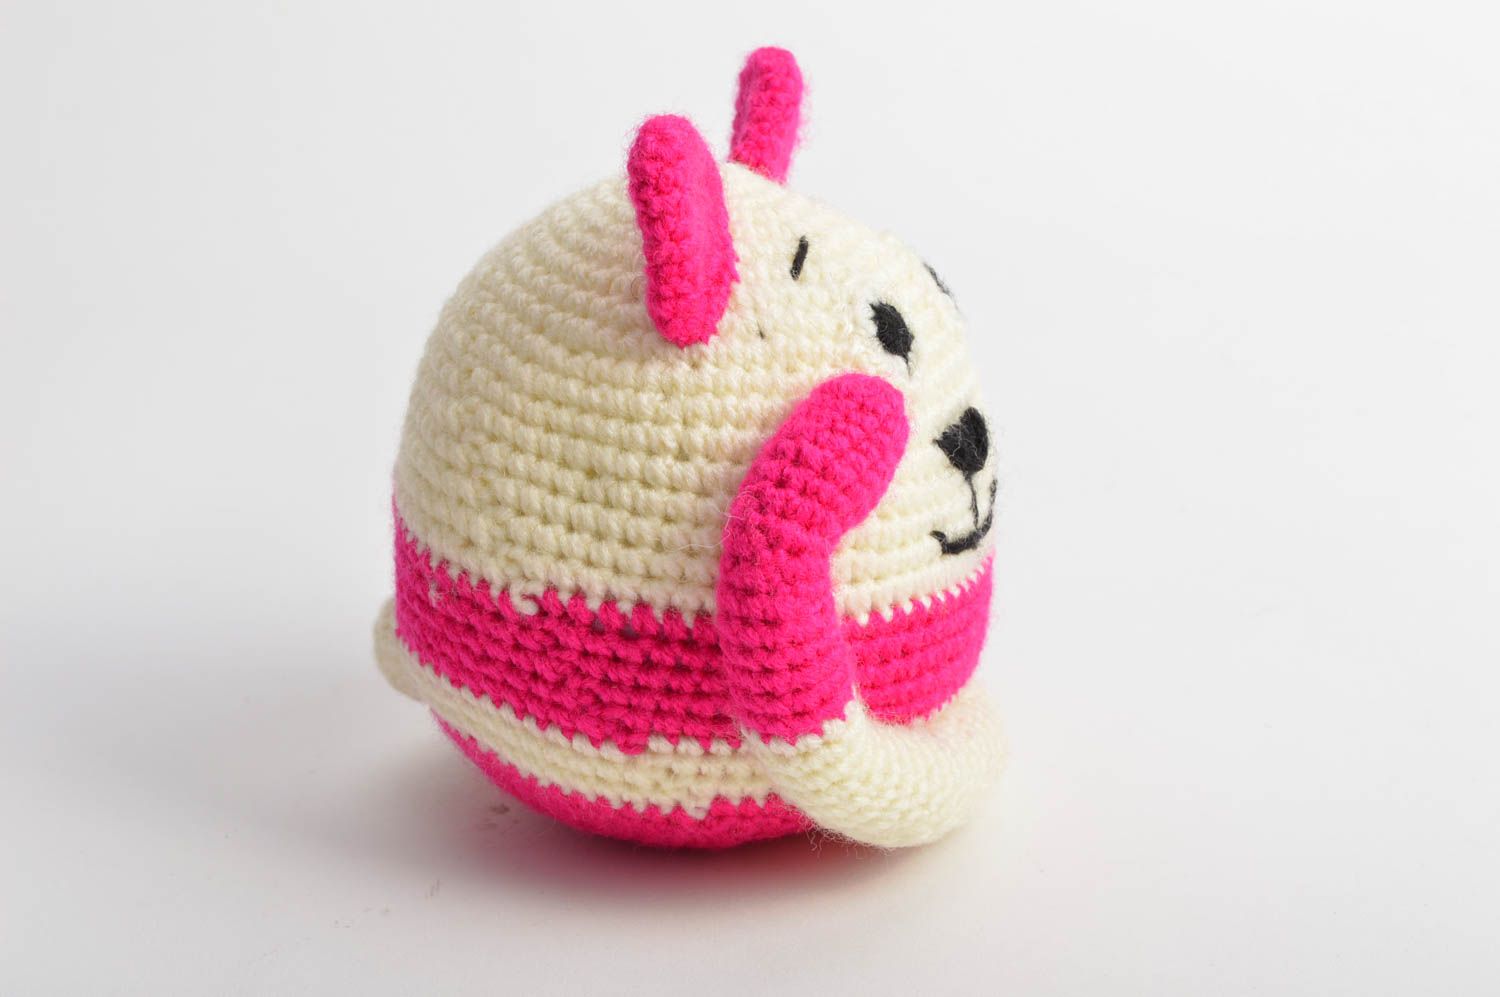 Handmade cute crocheted pink and white funny round toy in shape of cat photo 3